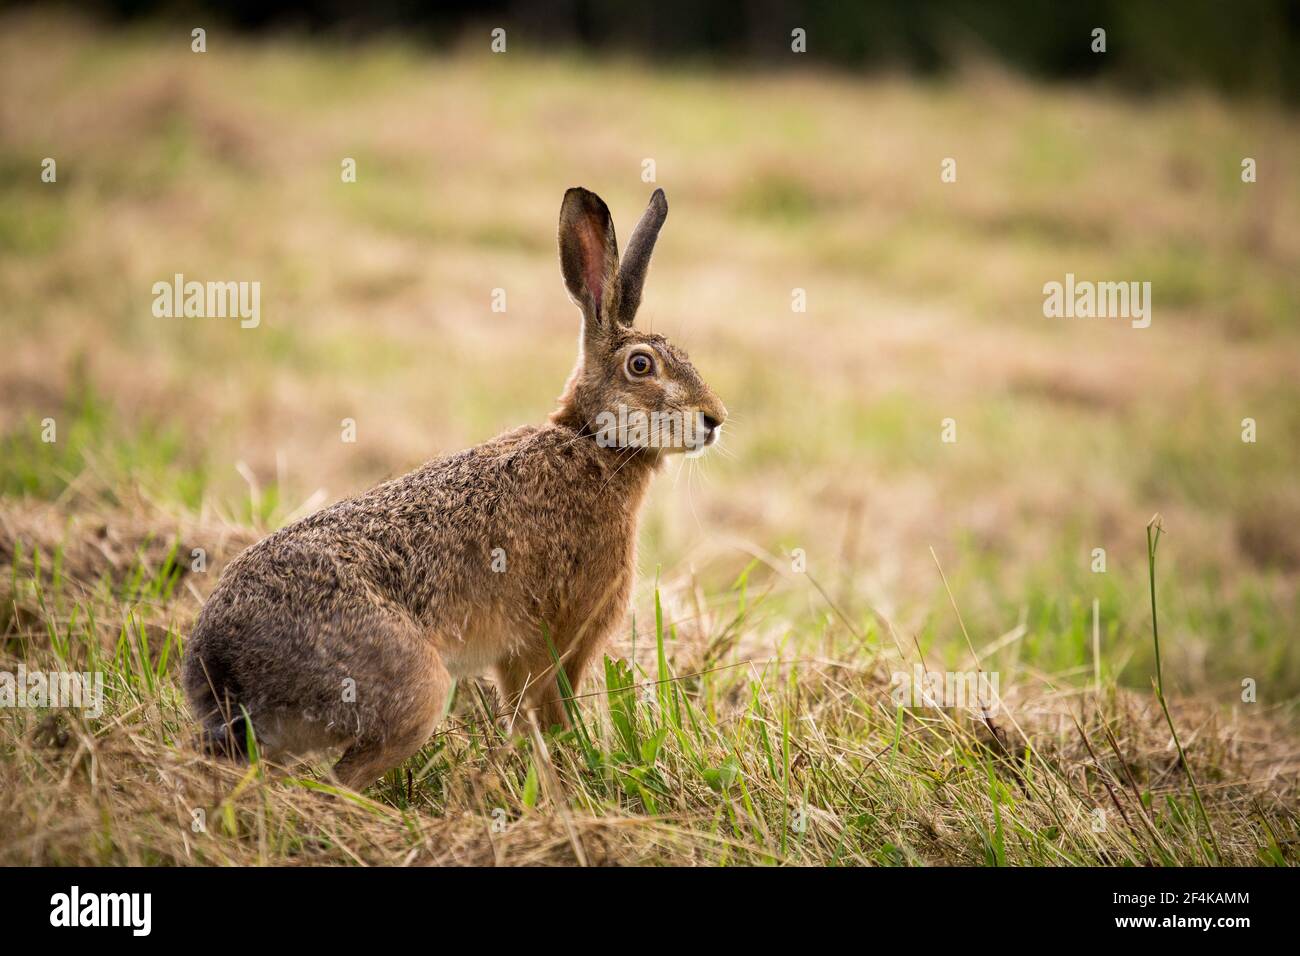 Wild hare in green grass Stock Photo